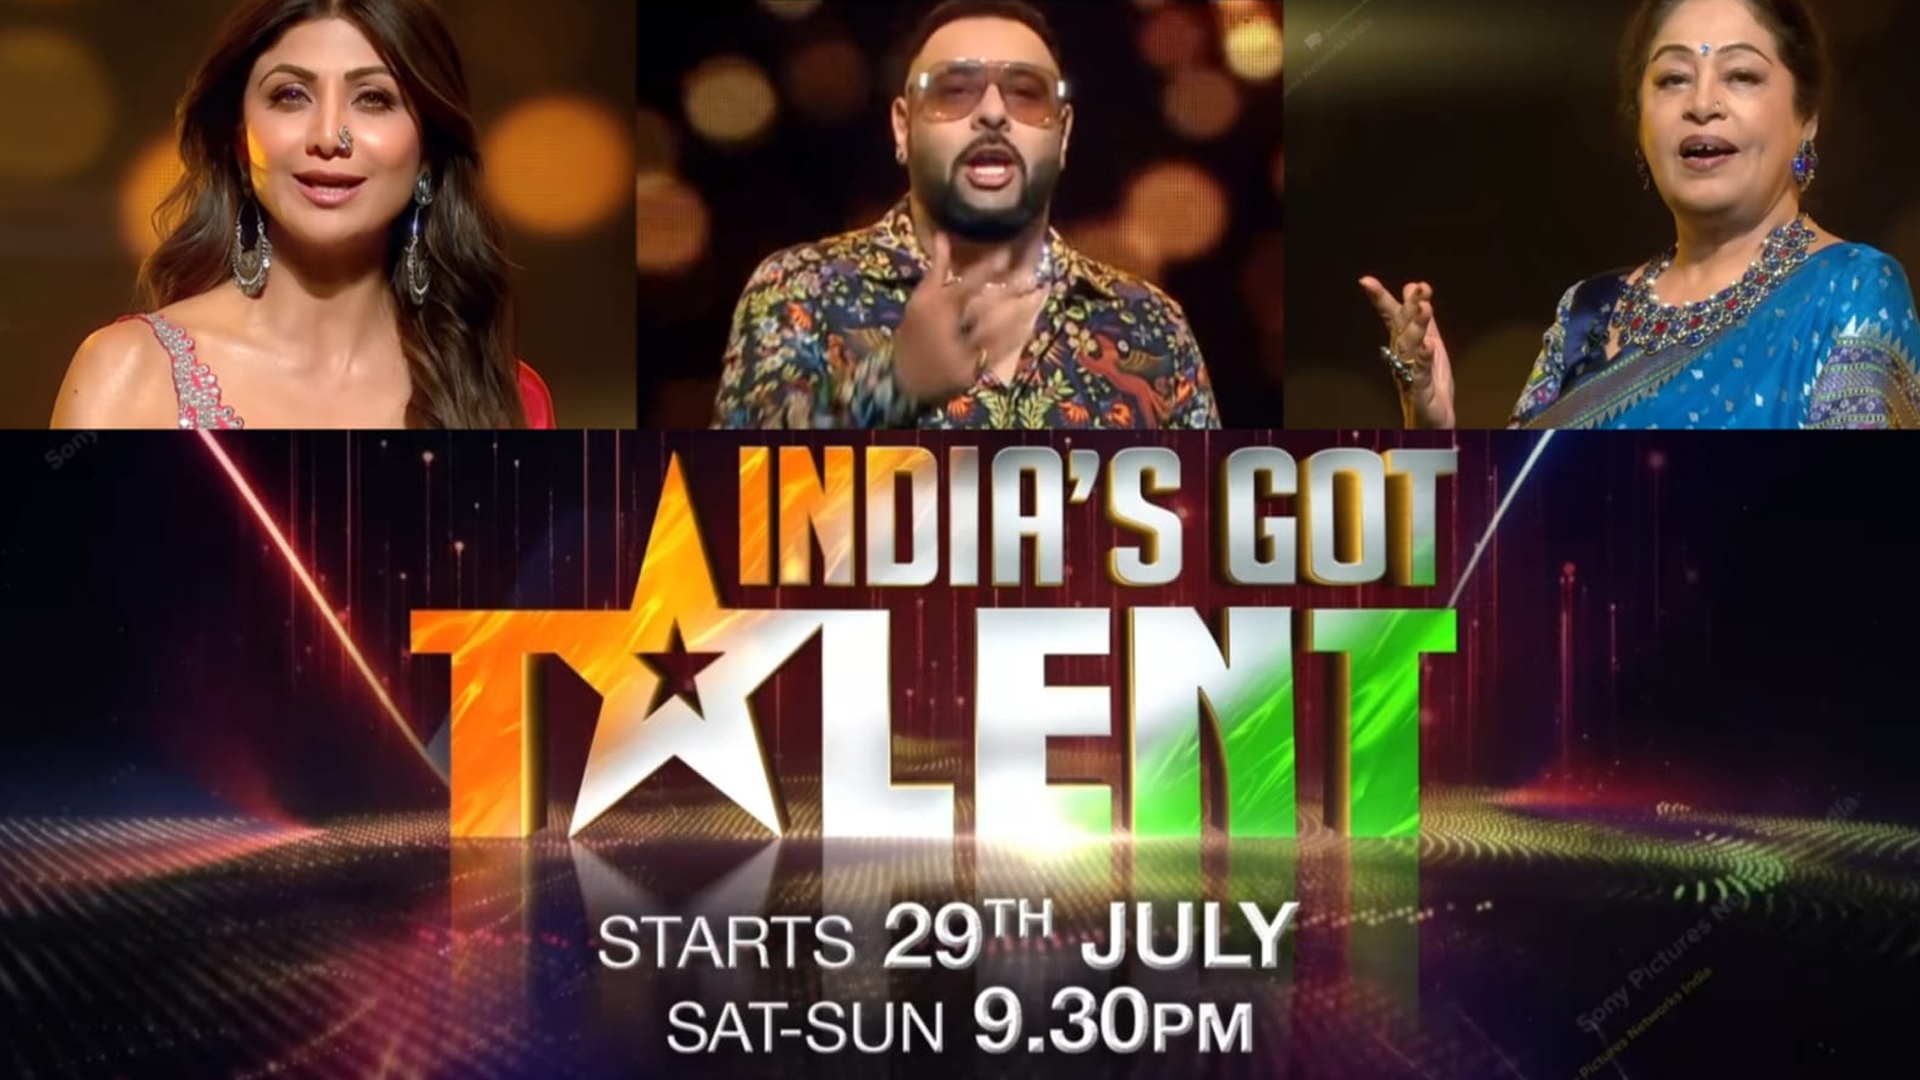 Celebrating the exceptional achievements of diverse talent, India’s Got Talent creates history by breaking multiple Guinness World Records